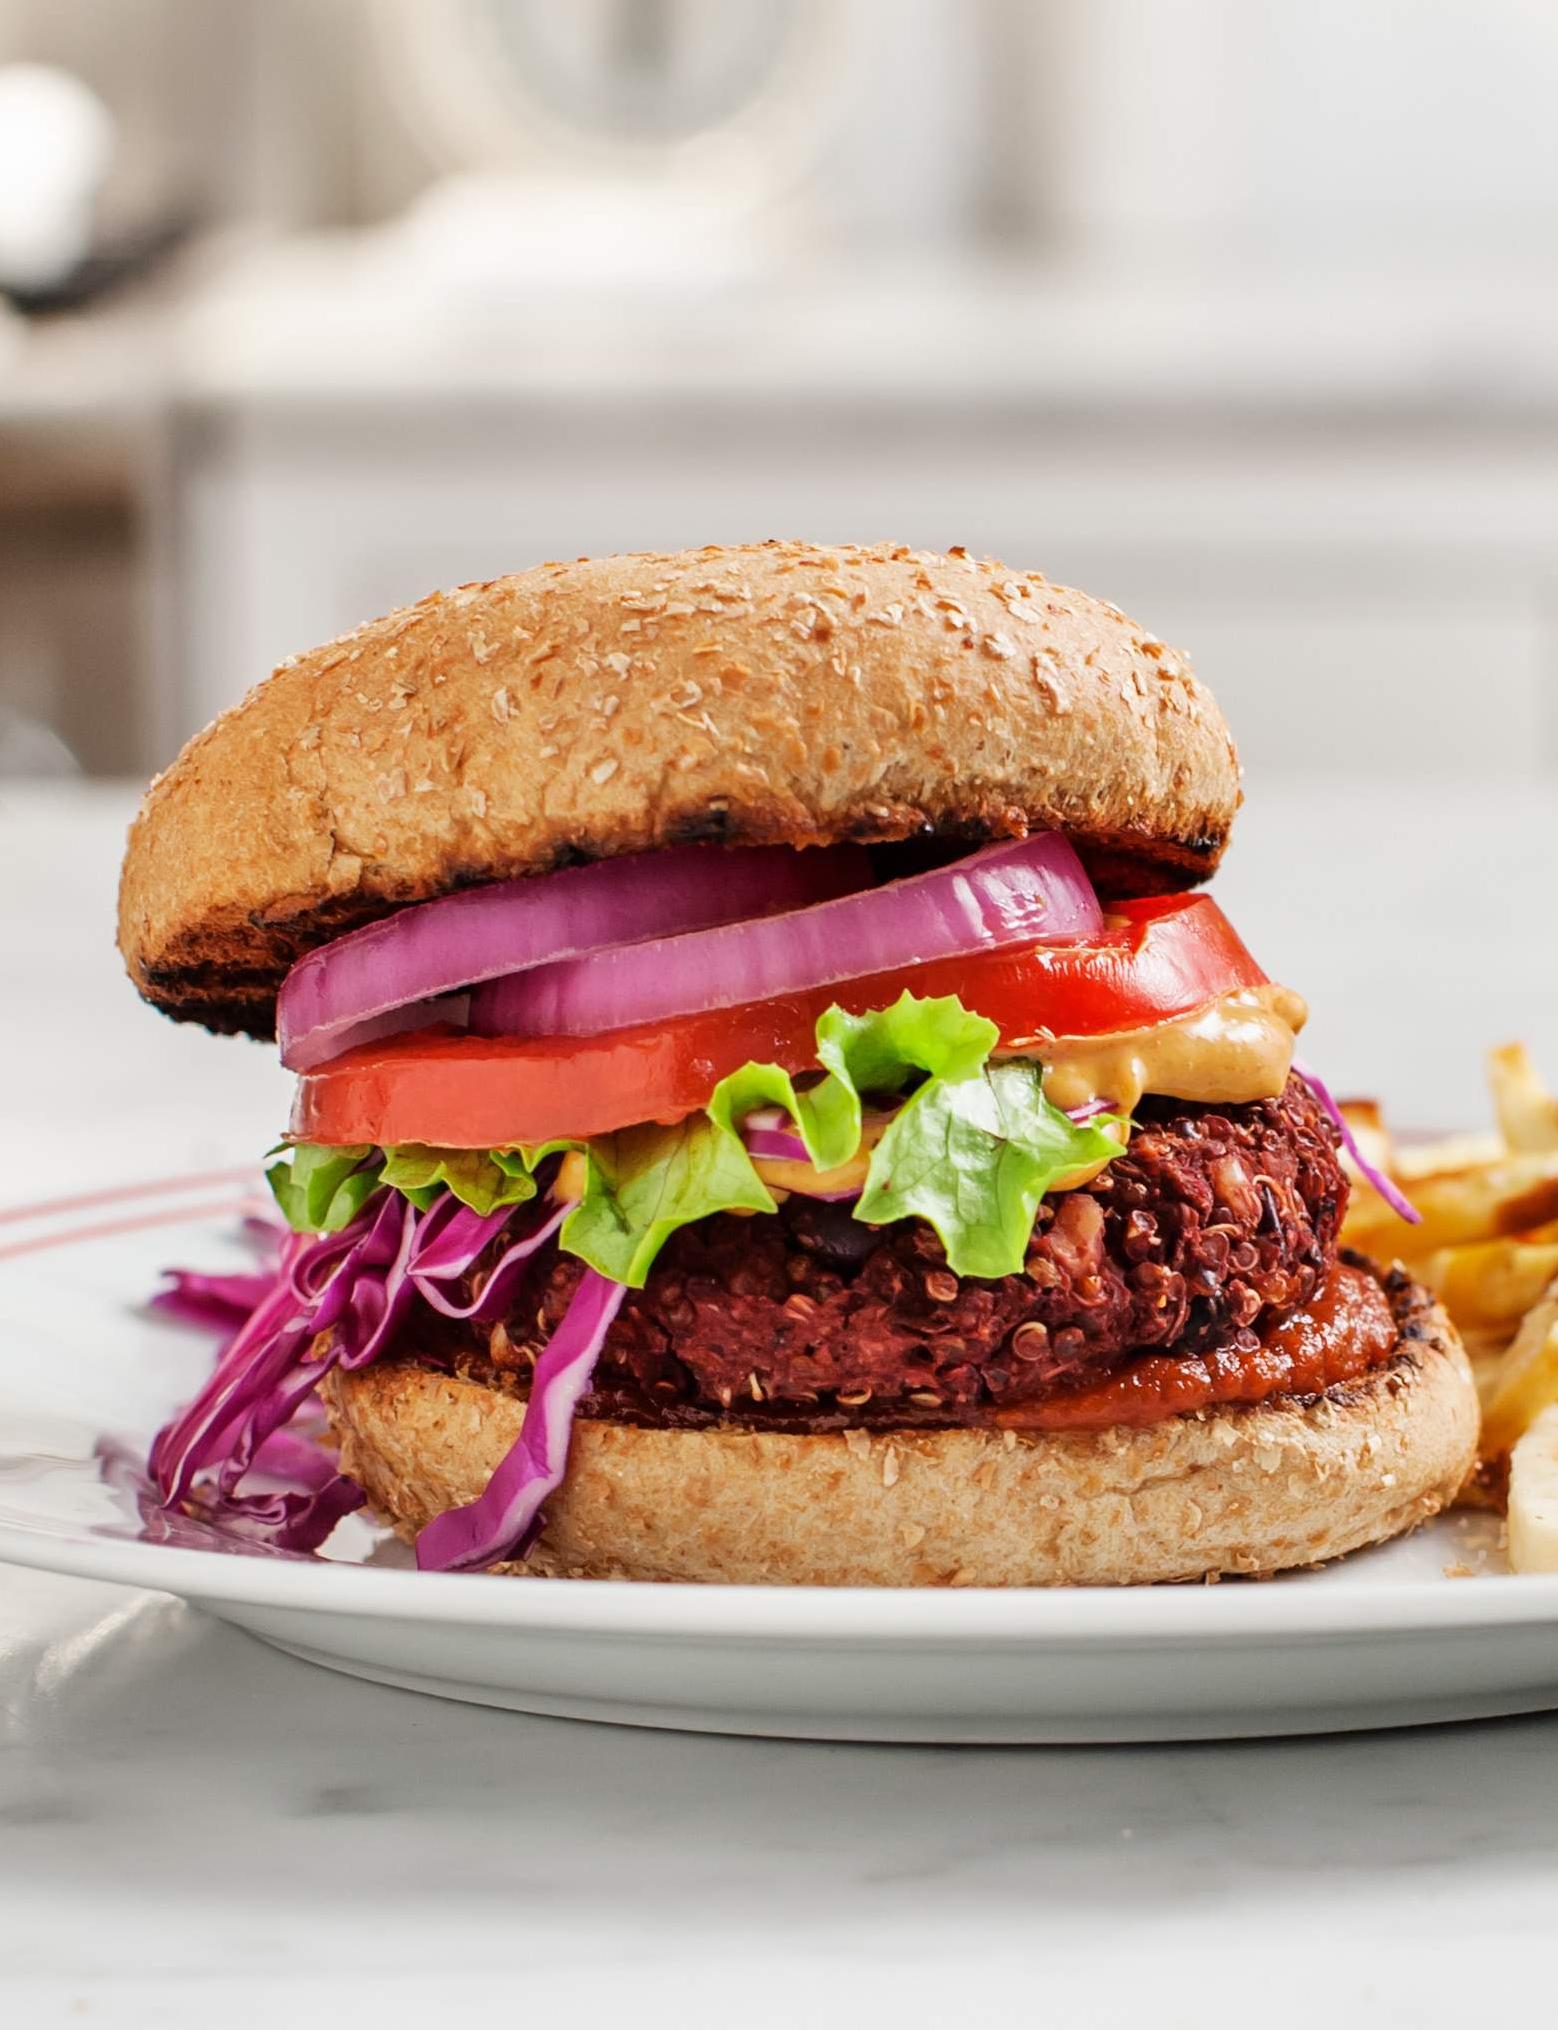  These burgers are vegan-friendly and gluten-free, a win-win!